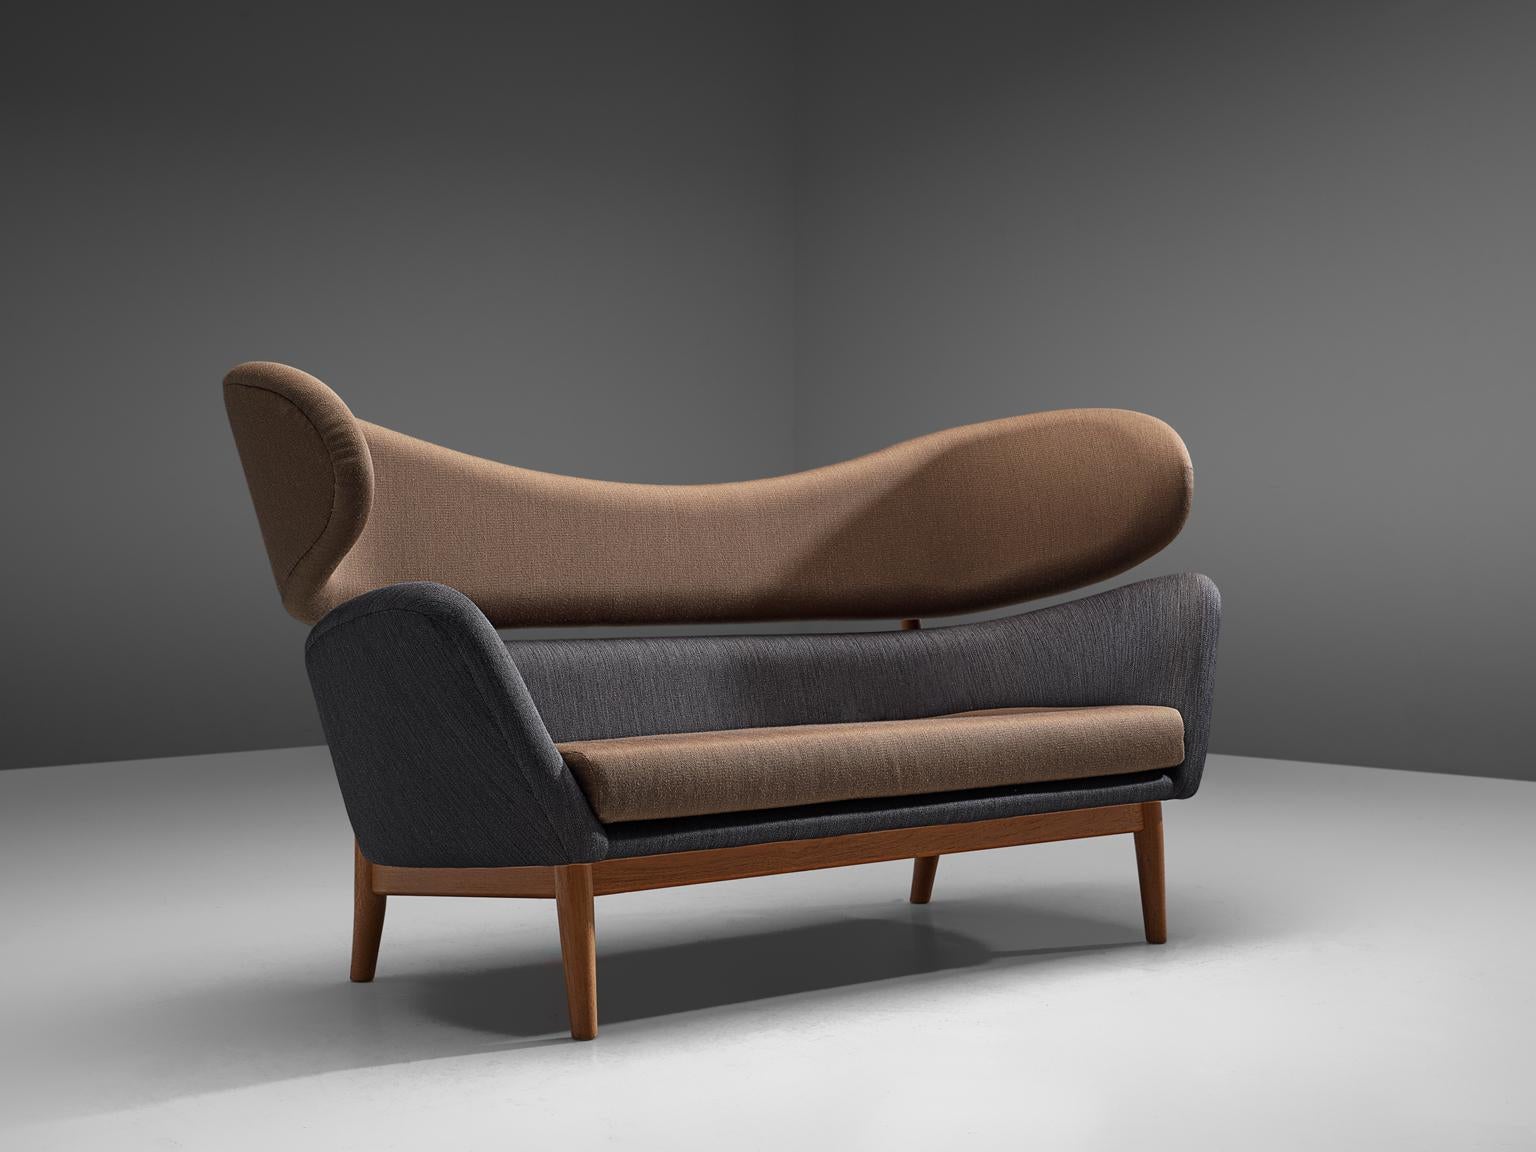 Finn Juhl, 'Baker' sofa, fabric and oak, Denmark, design 1951, recent production.

The Baker sofa was originally designed for Baker Furniture Inc., USA in 1951. In its modern design, Finn Juhl used a two-piece curved back that embraces the sitter